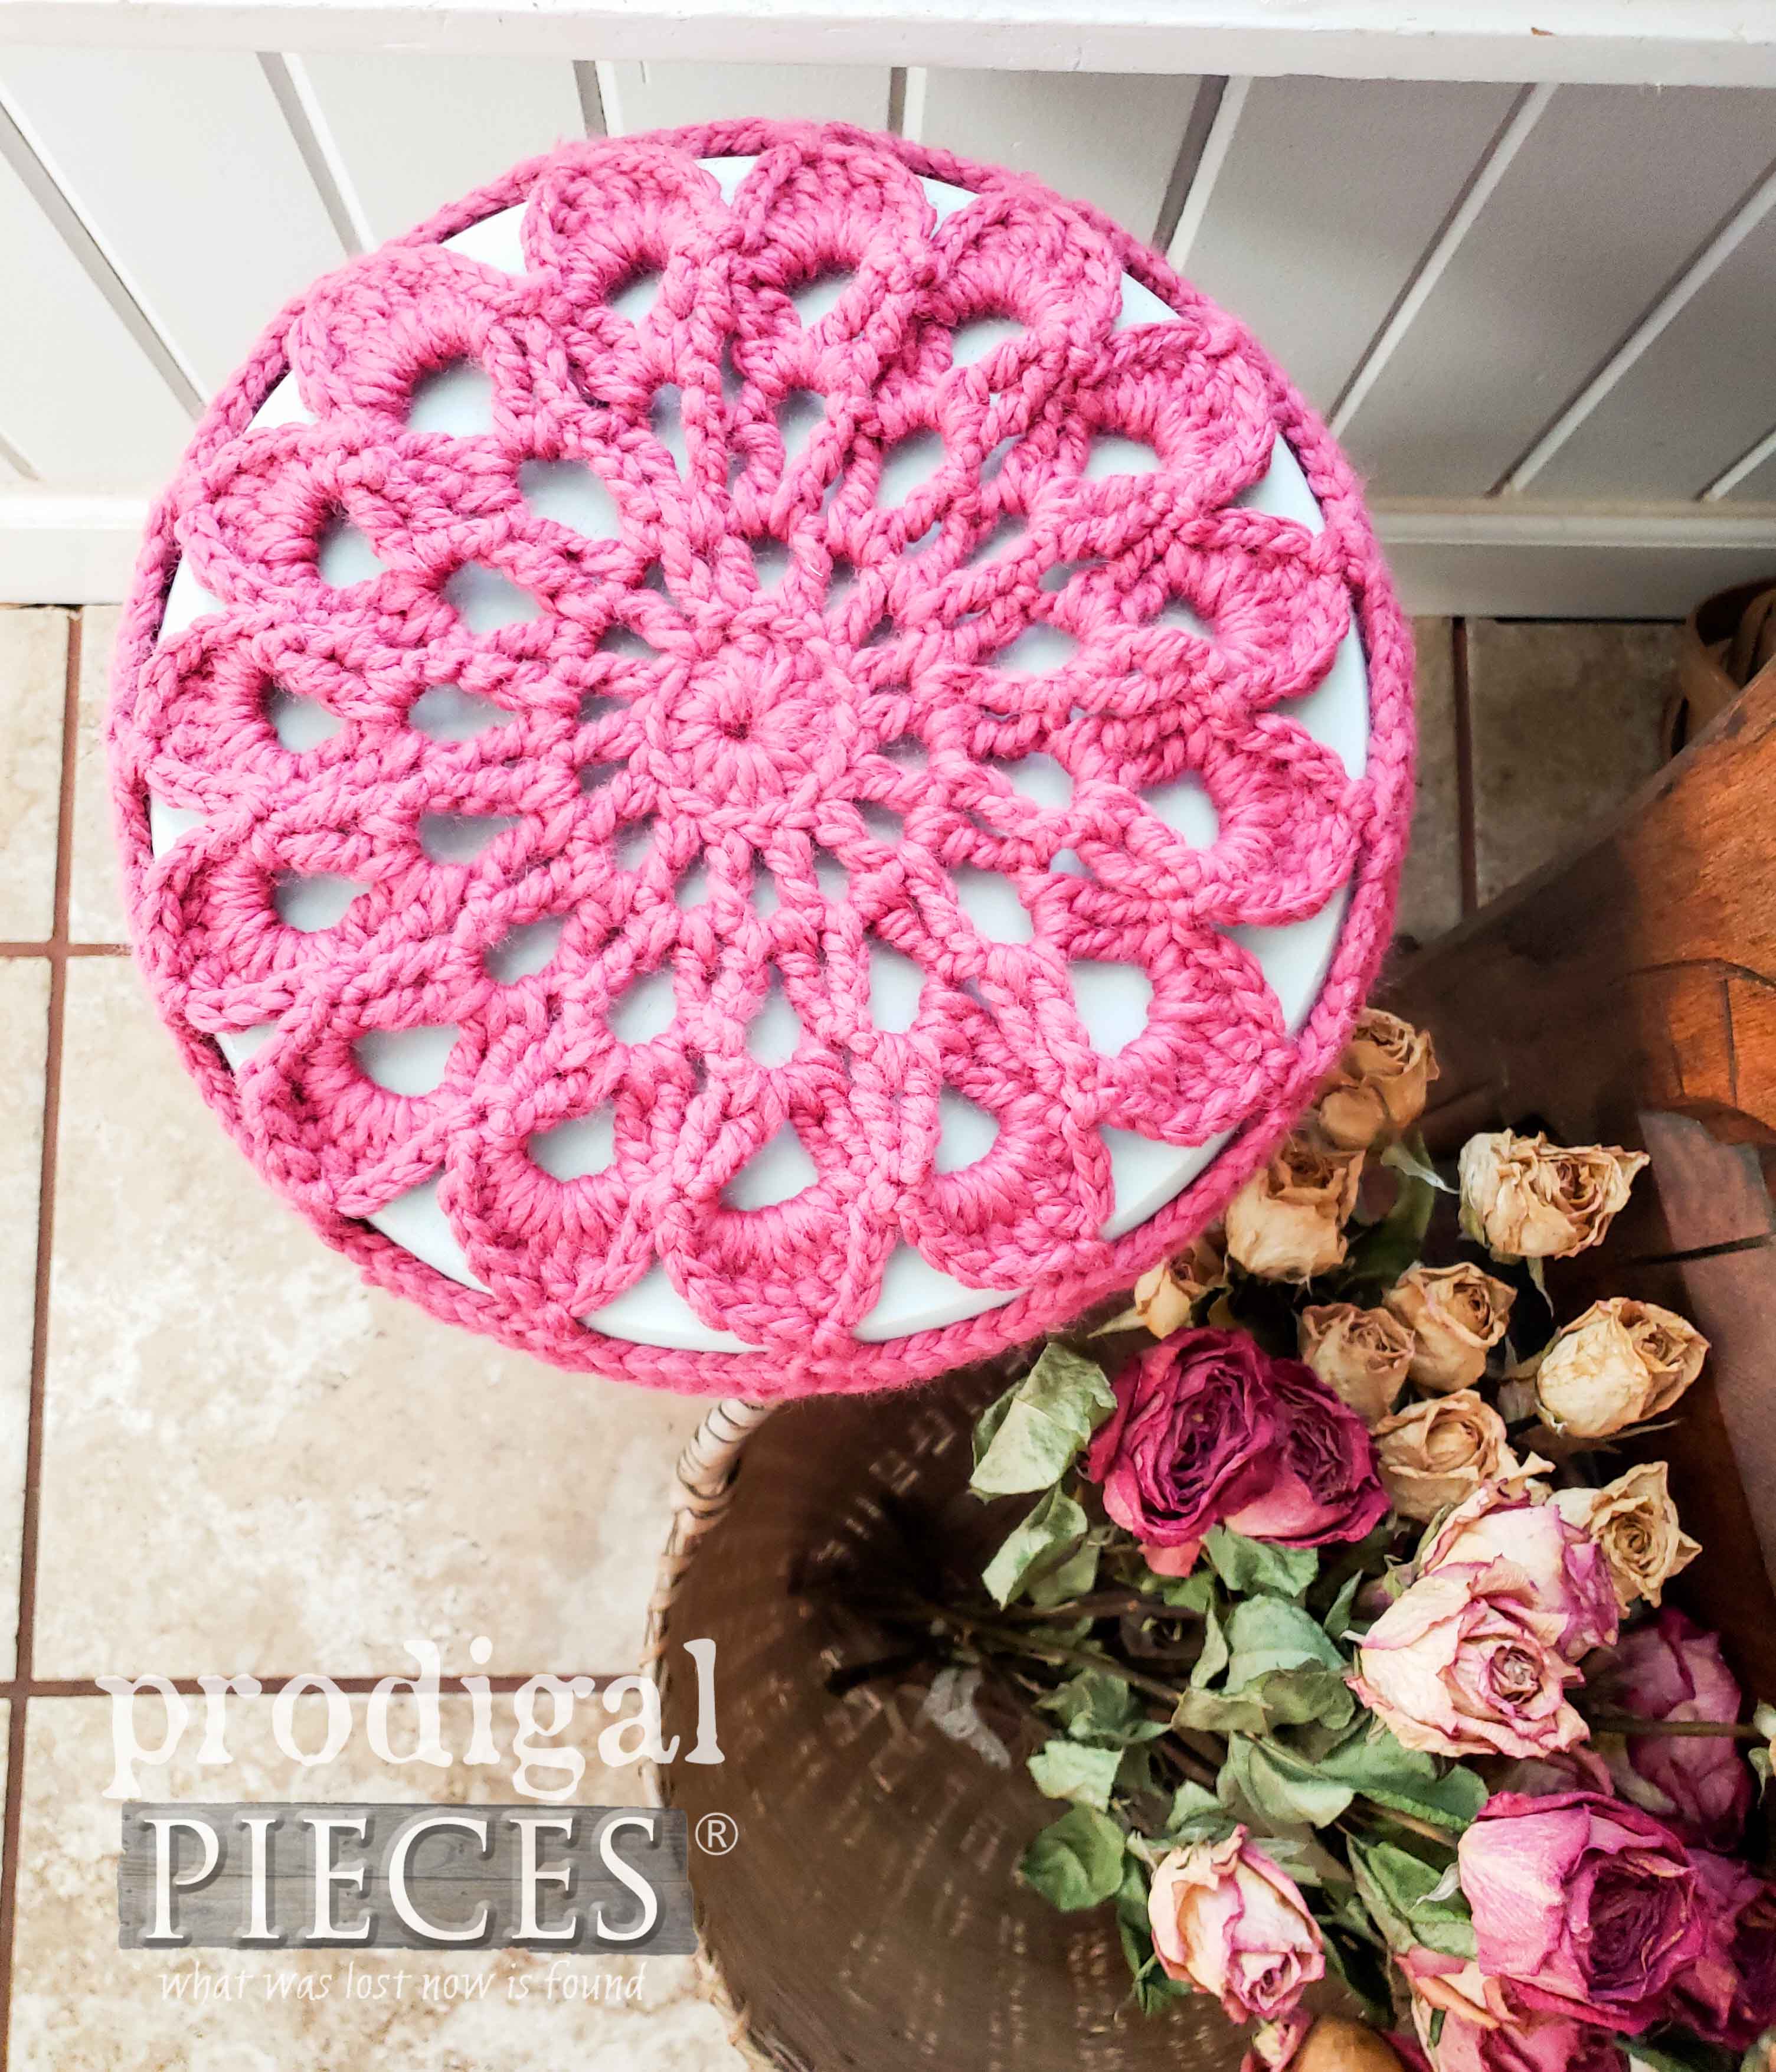 Mandala Style Crochet Stool Cover in Wool Handmade by Larissa of Prodigal Pieces | prodigalpieces.com #prodigalpieces #handmade #furniture #crochet #diy #home #homedecor #cottagestyle